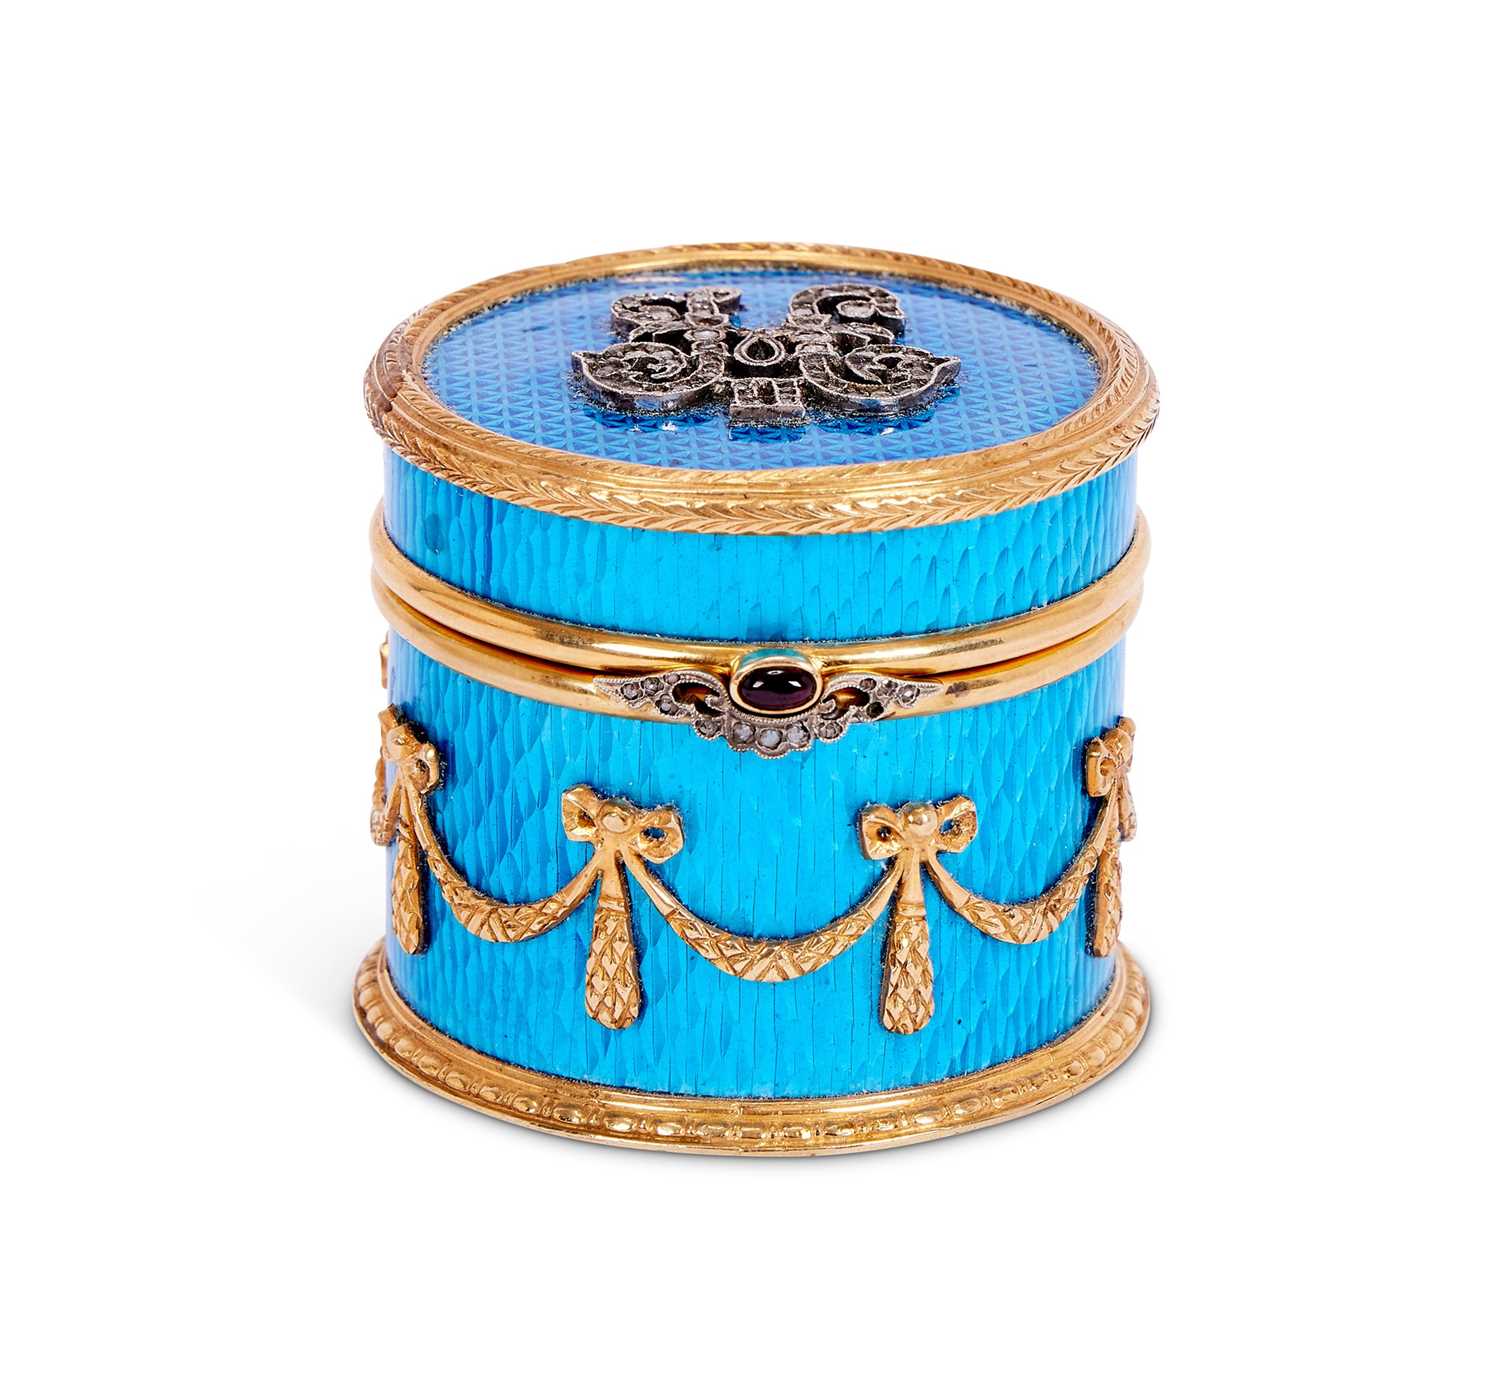 A FABERGE STYLE SILVER GILT, DIAMOND AND ENAMEL MOUNTED PILL BOX - Image 3 of 4